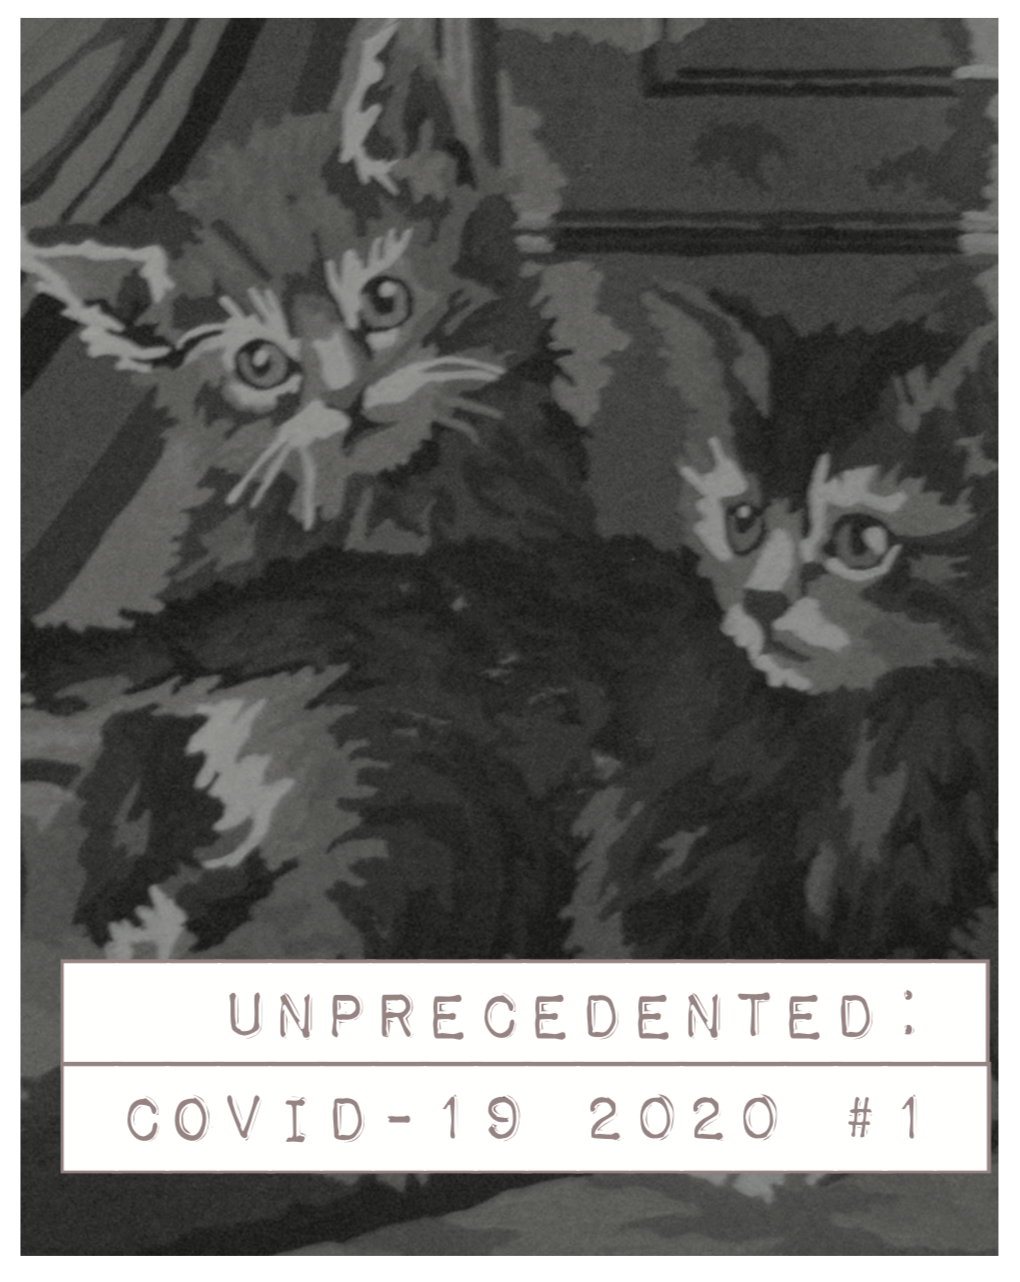 Zine cover, titled Unprecedented: Covid-19 2020. Black and white image with two cats.